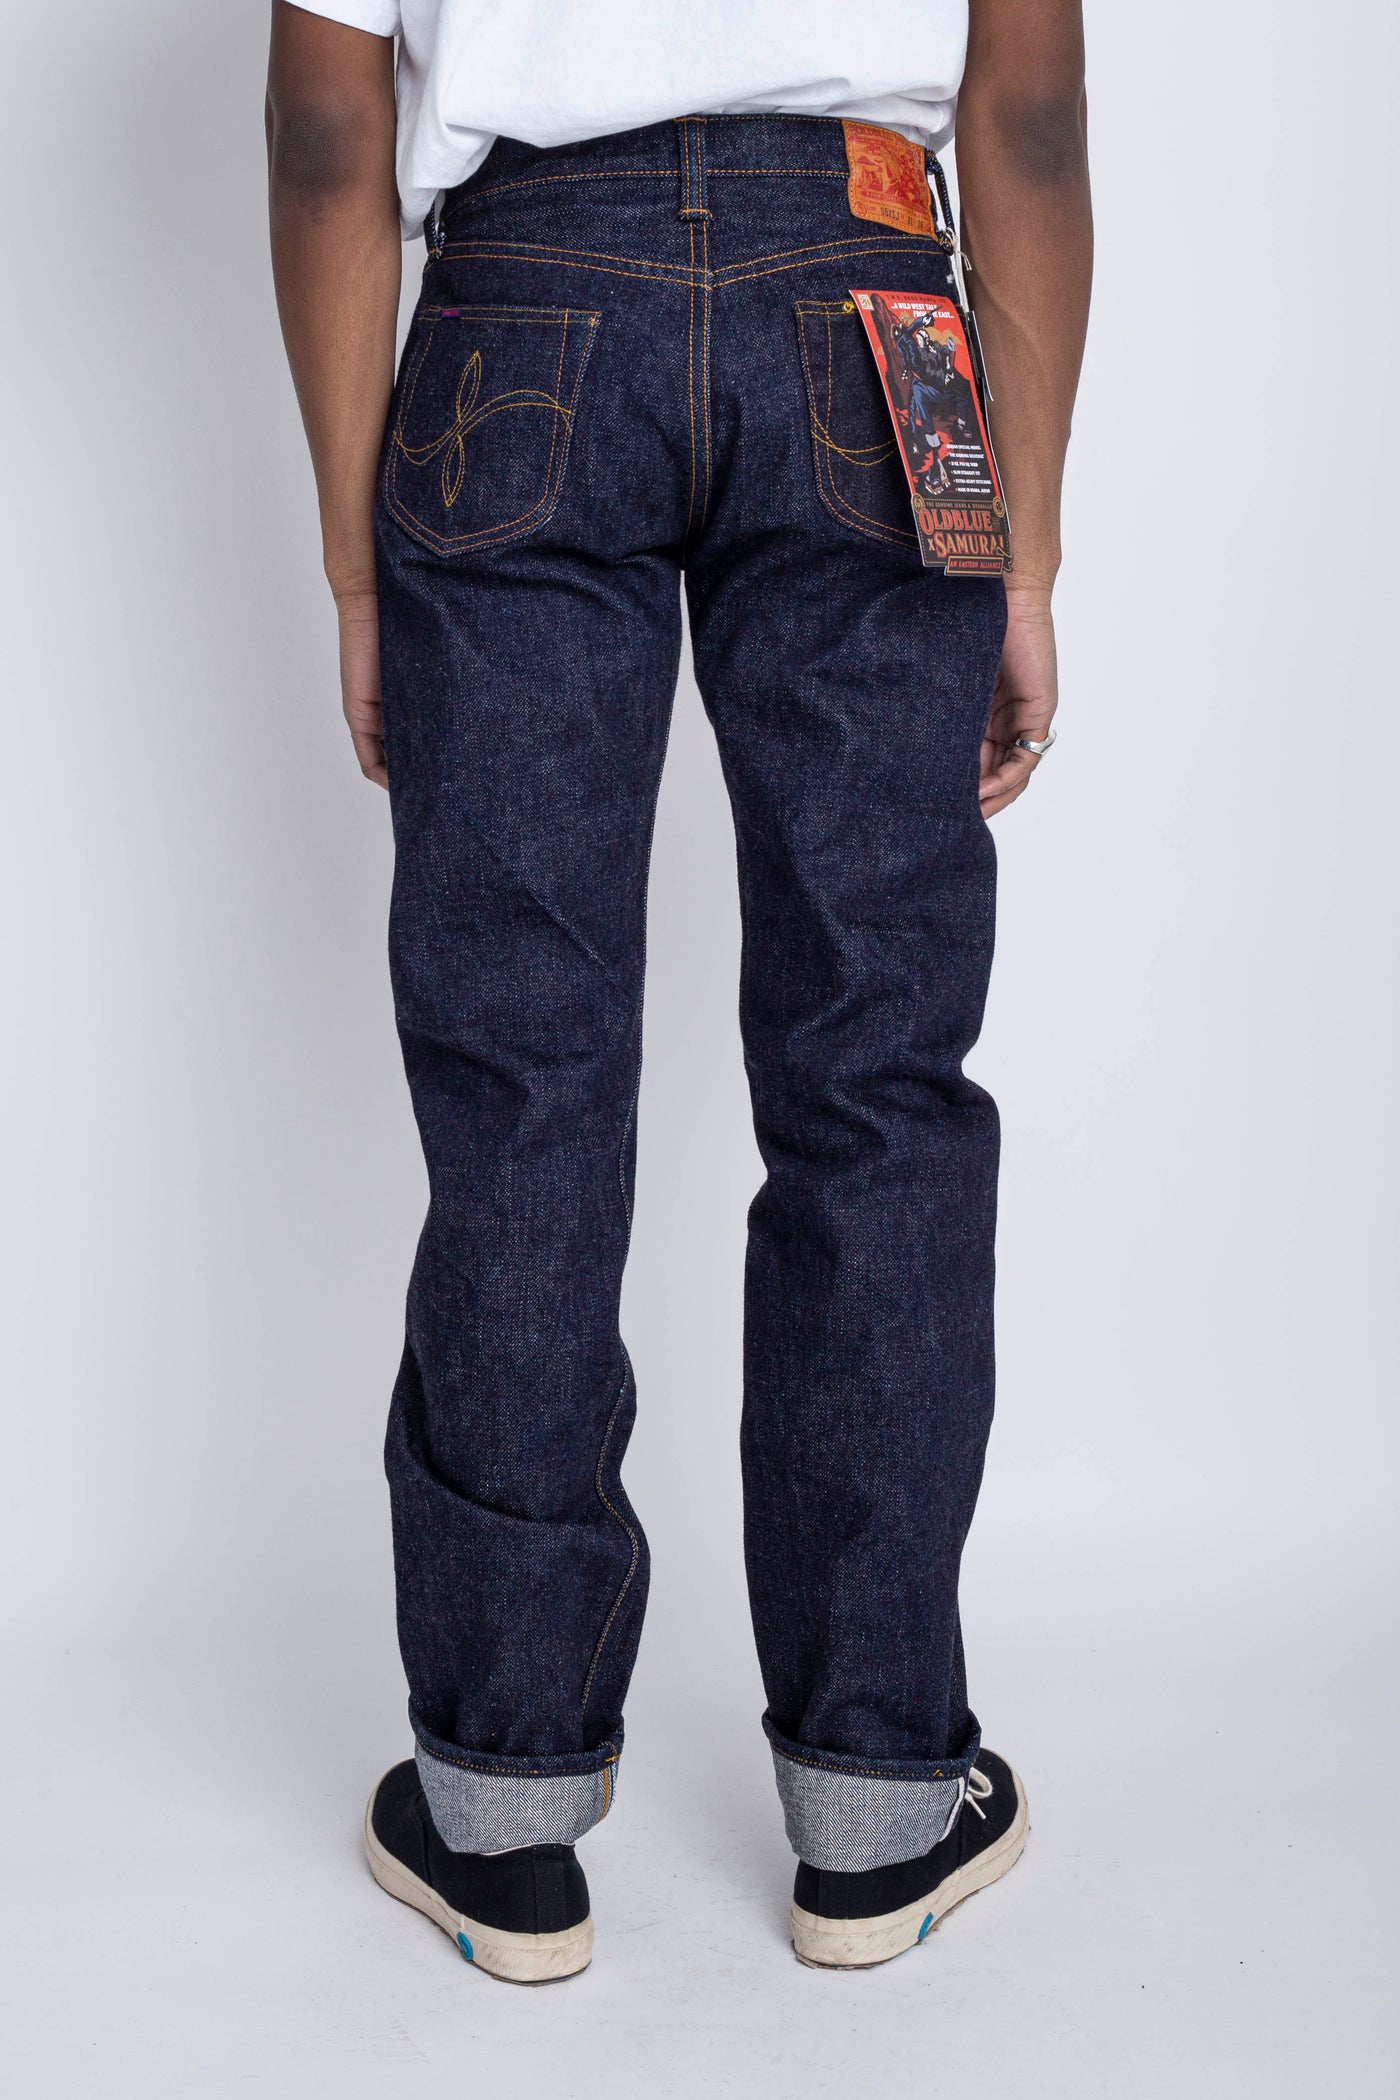 OLD BLUE X SAMURAI Limited Edition Slim Straight Fit